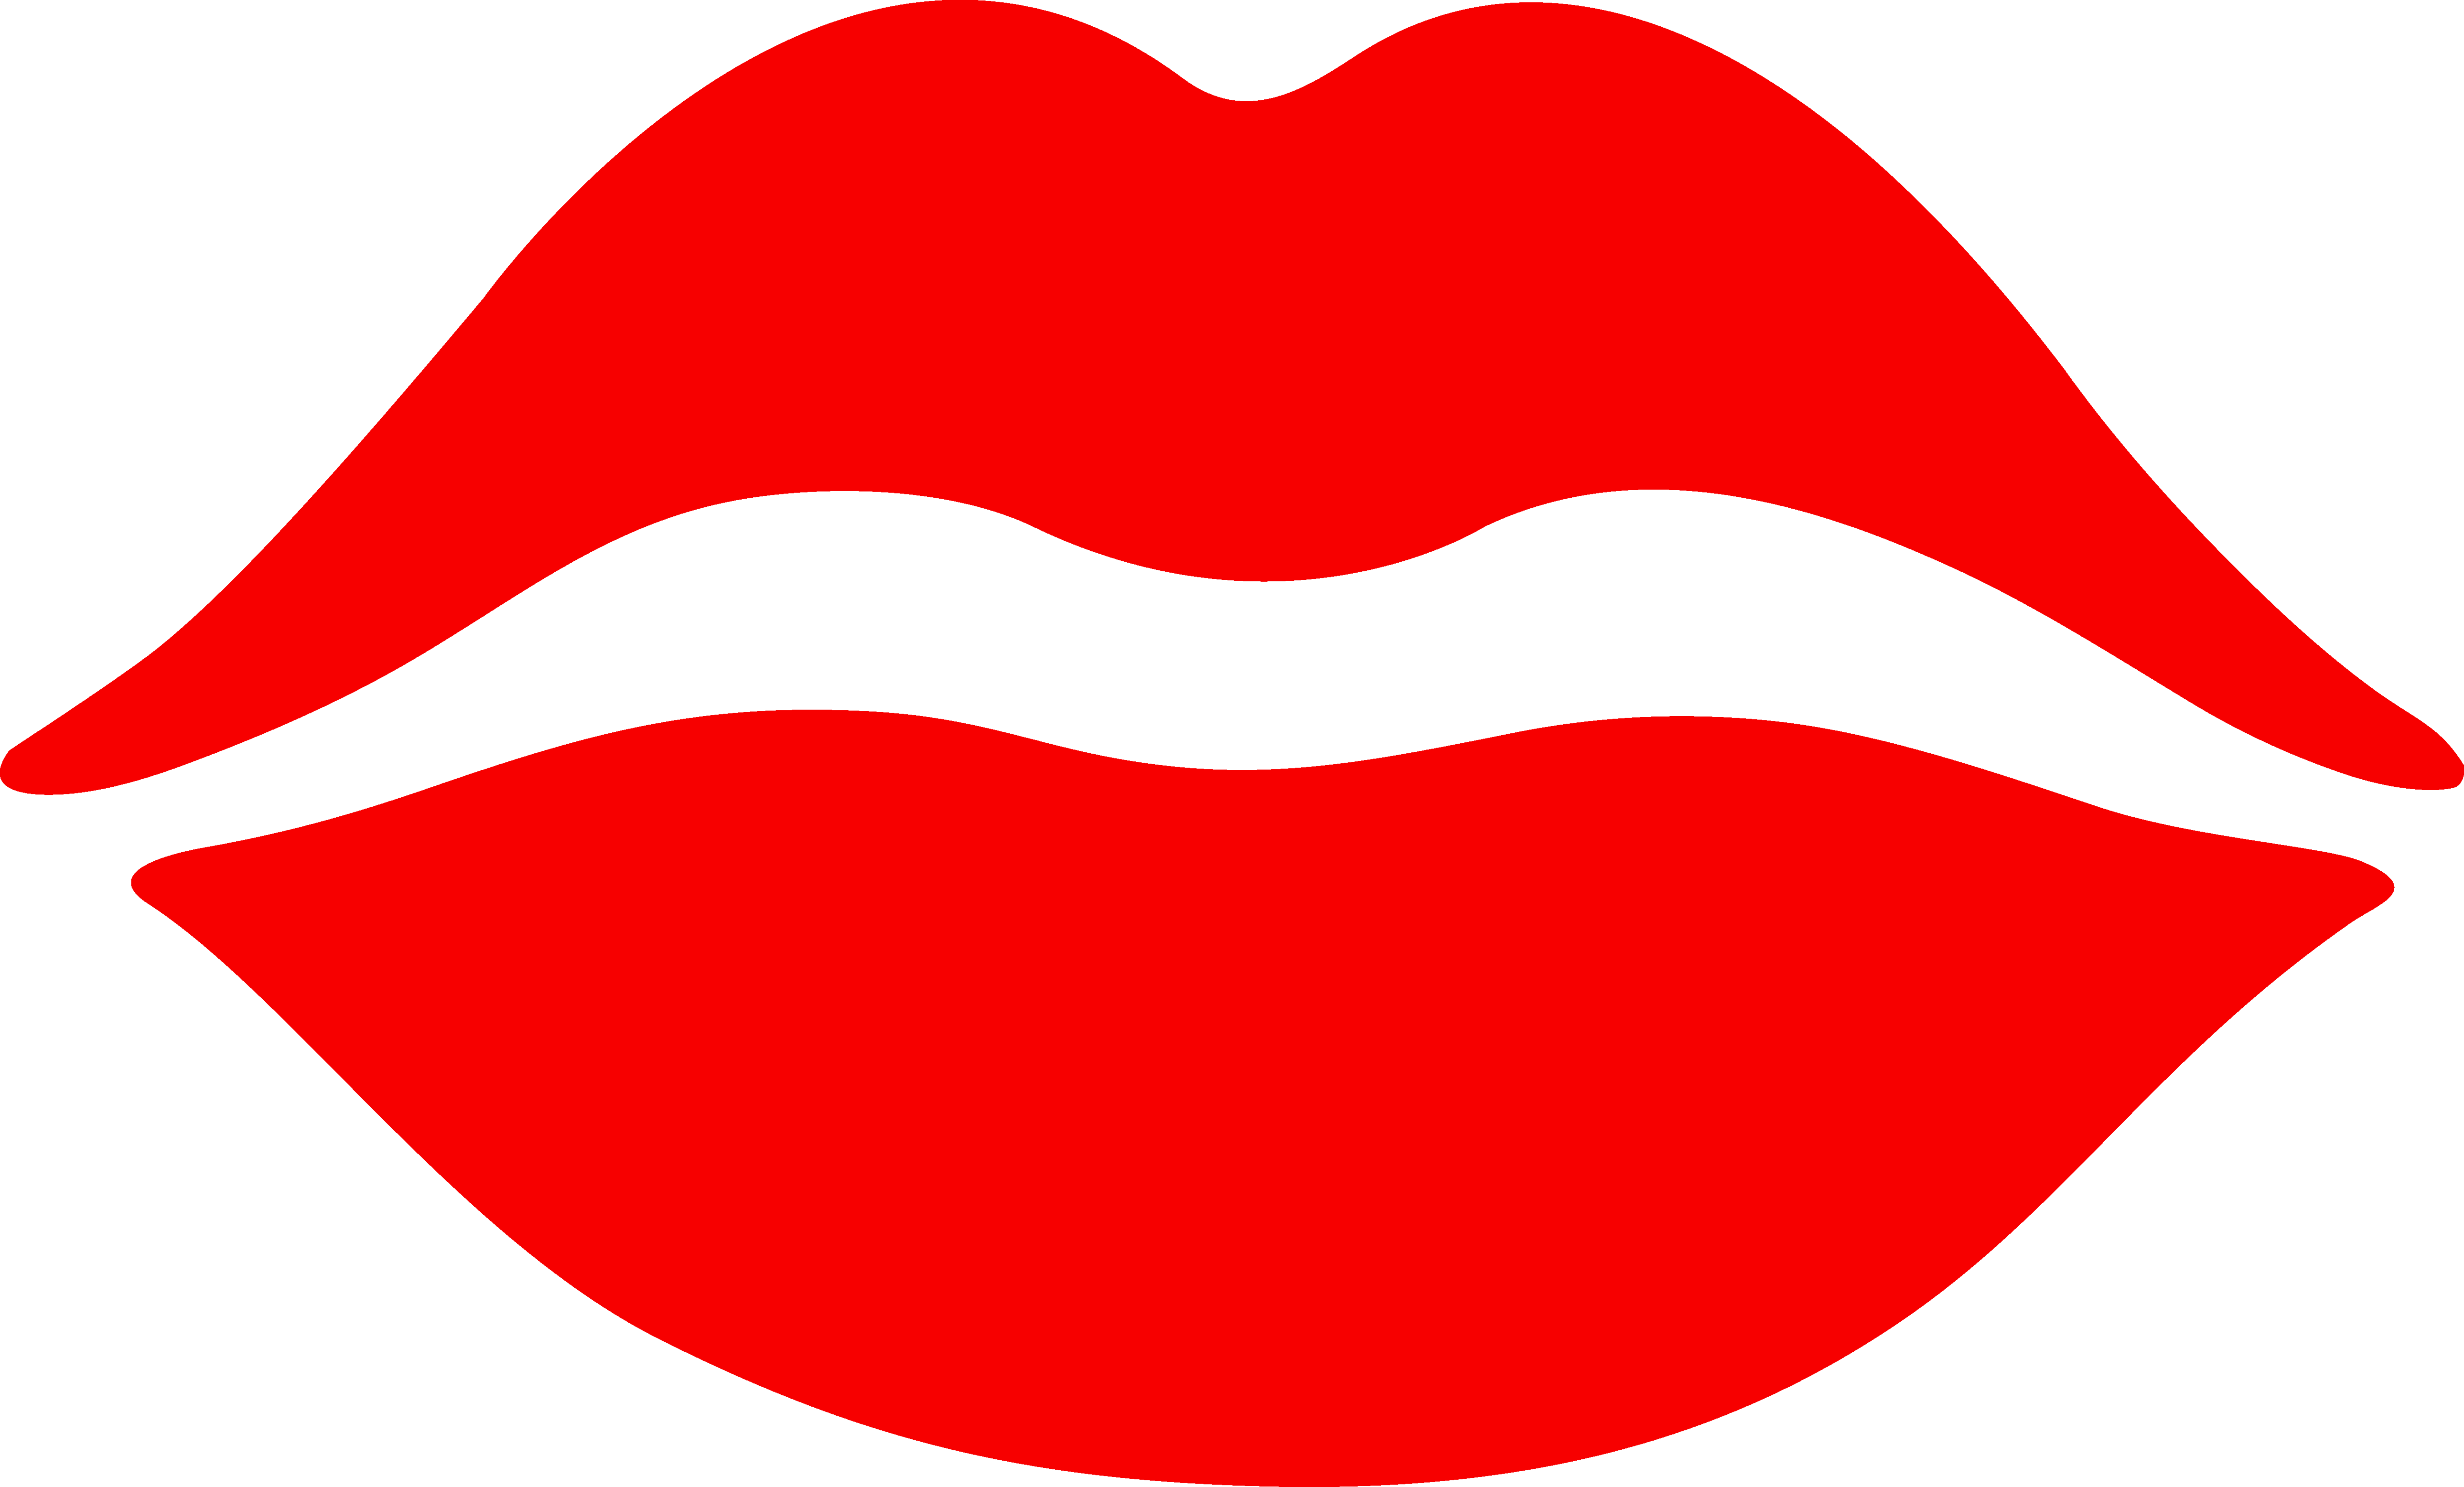 Red Lips Vector Clipart - Free to use Clip Art Resource